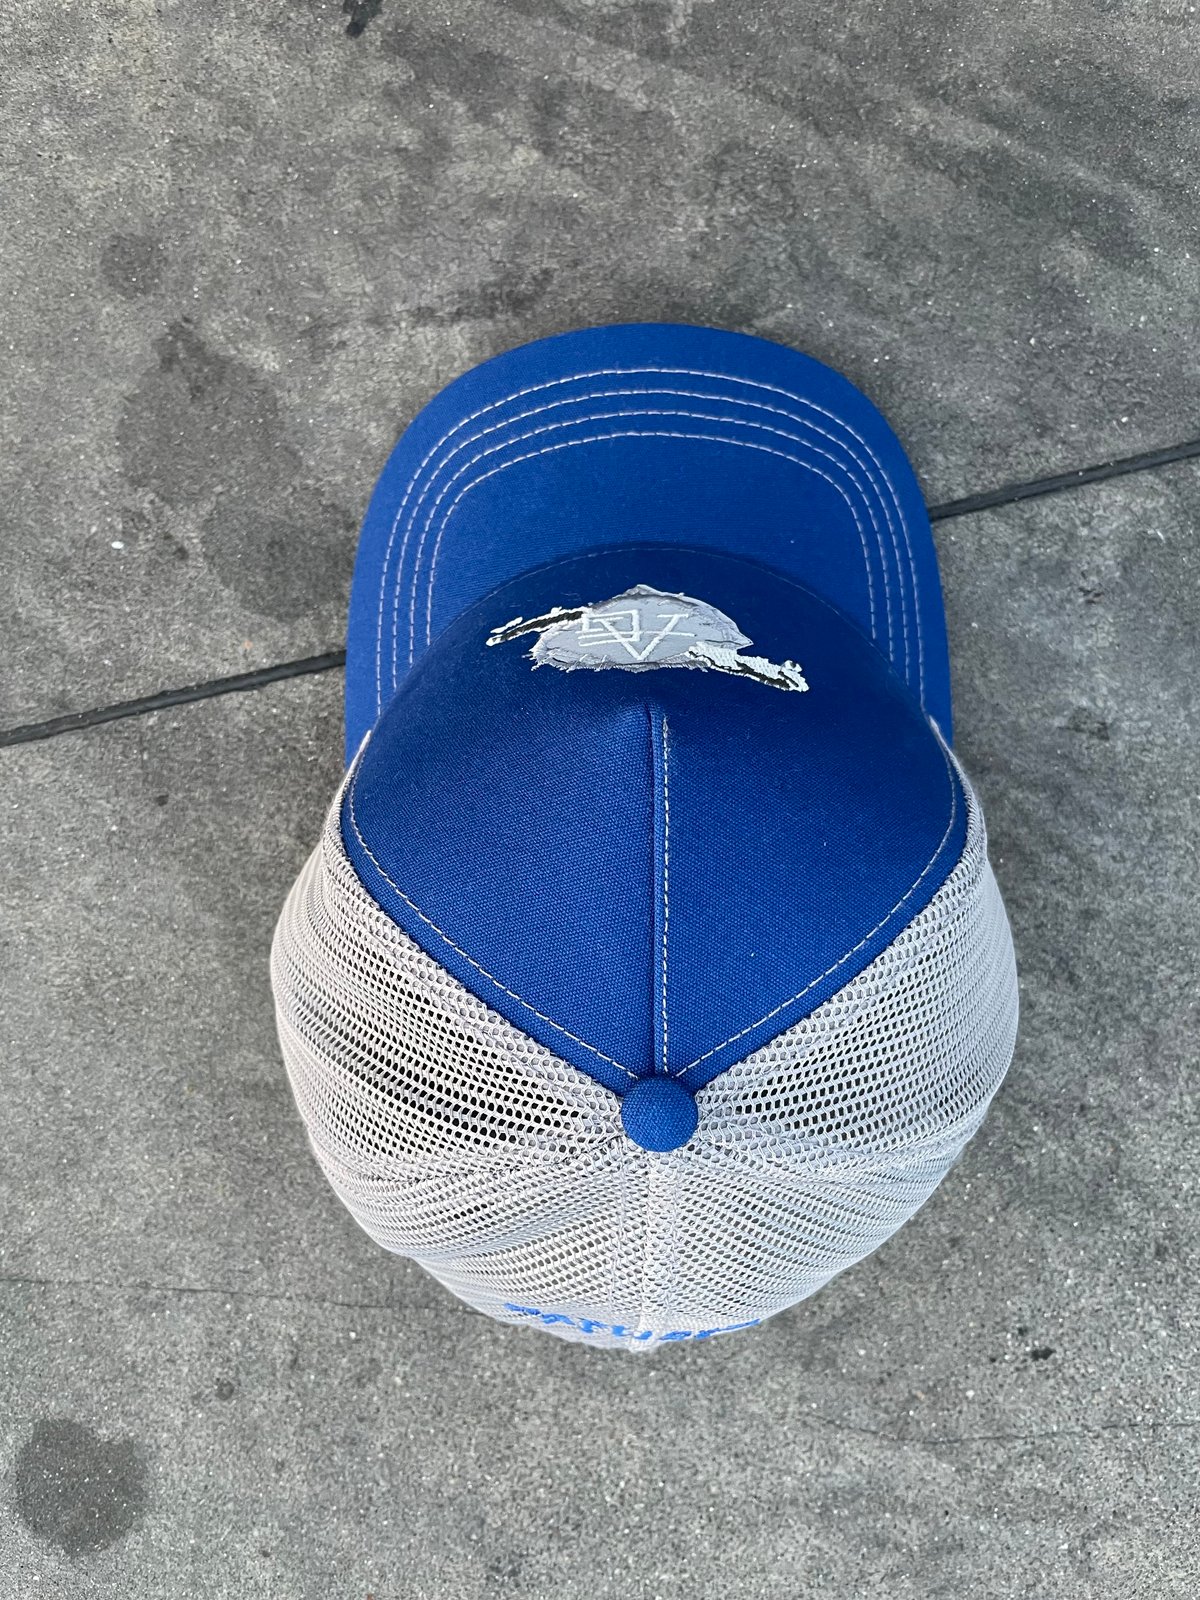 Image of Reflective & glow in the dark Royal blue trucker hat